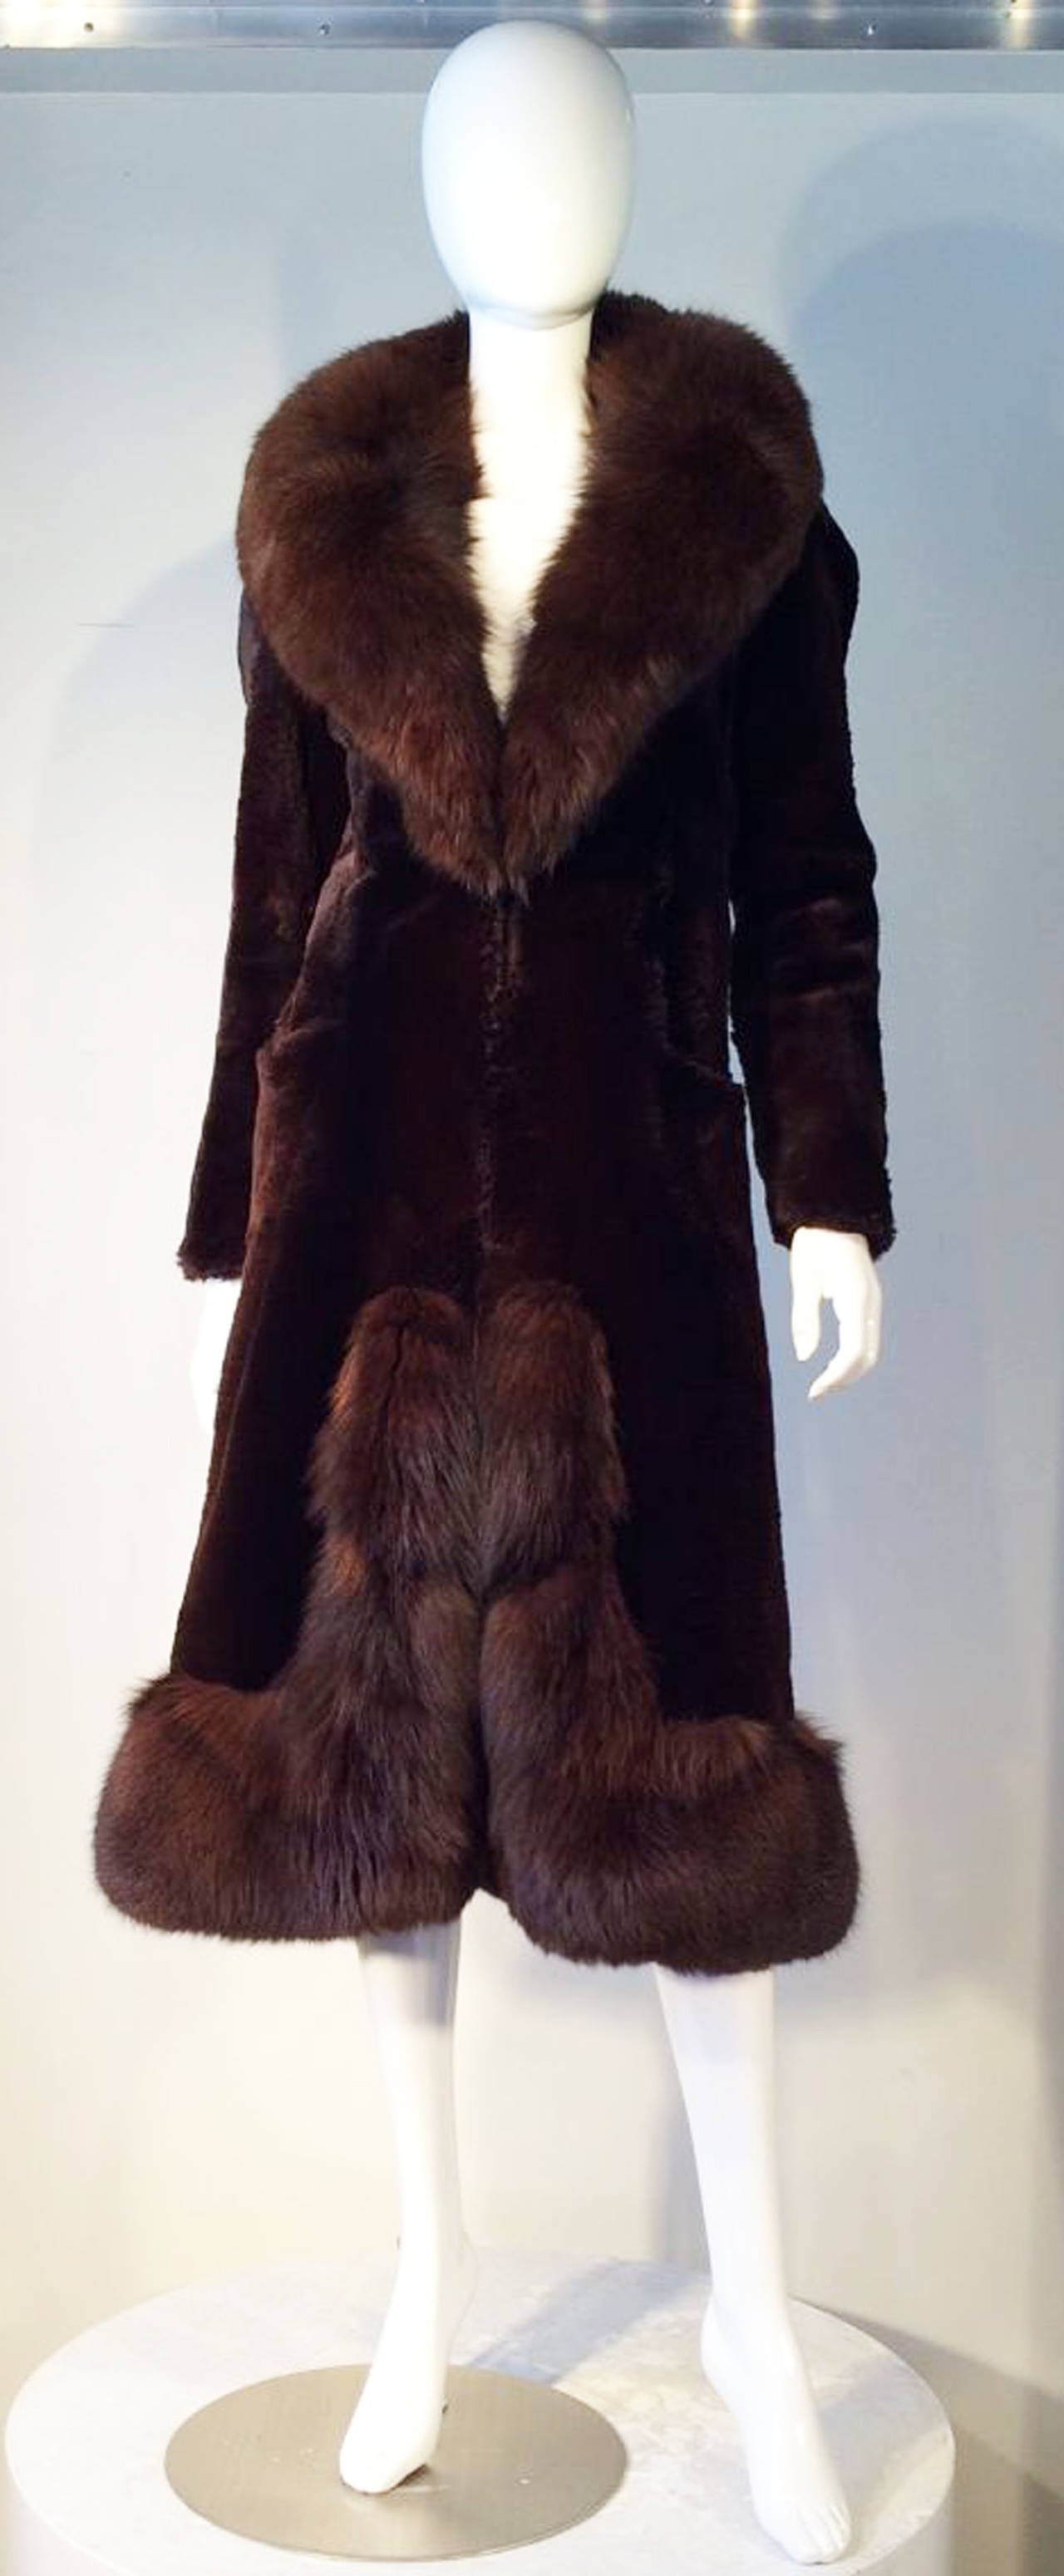 A fine and rare vintage Christian Dior sheared beaver fur coat. Item features matching color (rich dark brown) fox fur collar and trim. Coat features a nipped waist, hidden side pockets, fully silk lined and hidden hook closures. Excellent condition.